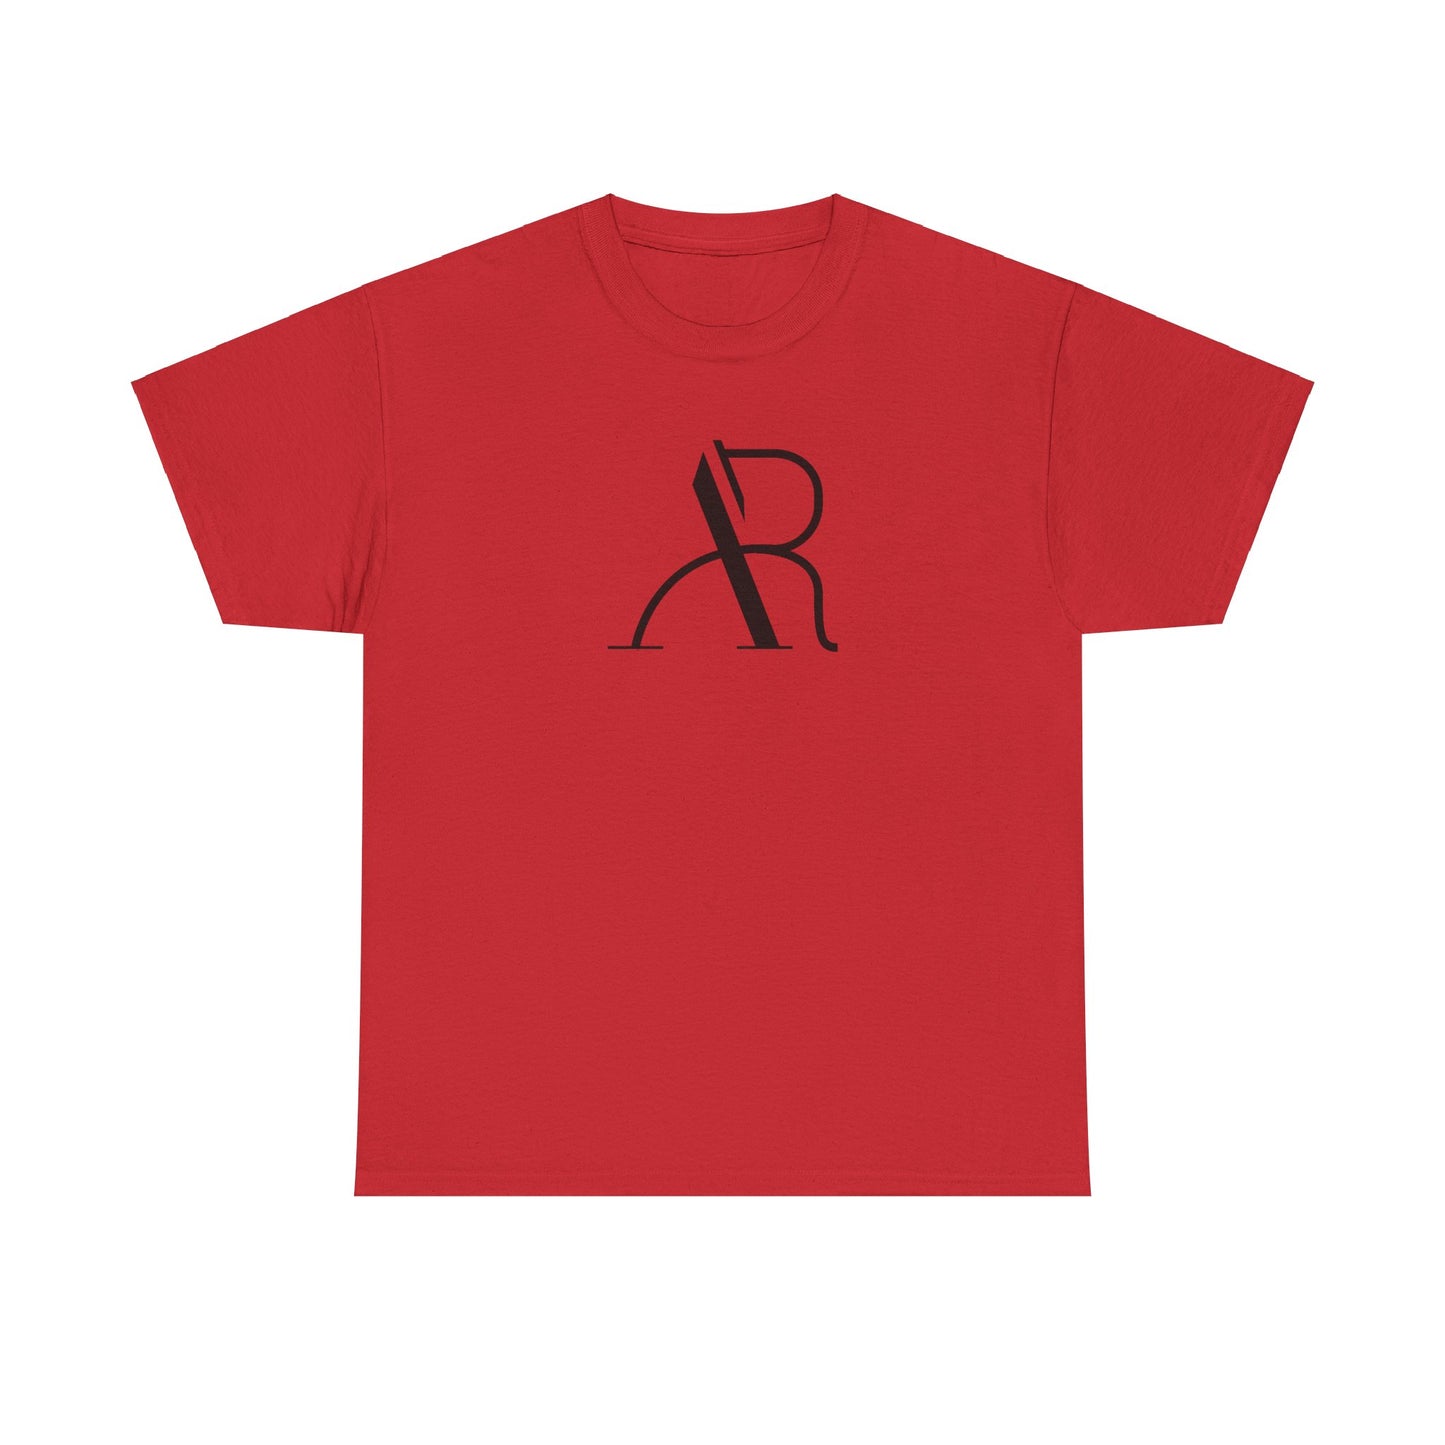 Amou Ring "AR" Tee